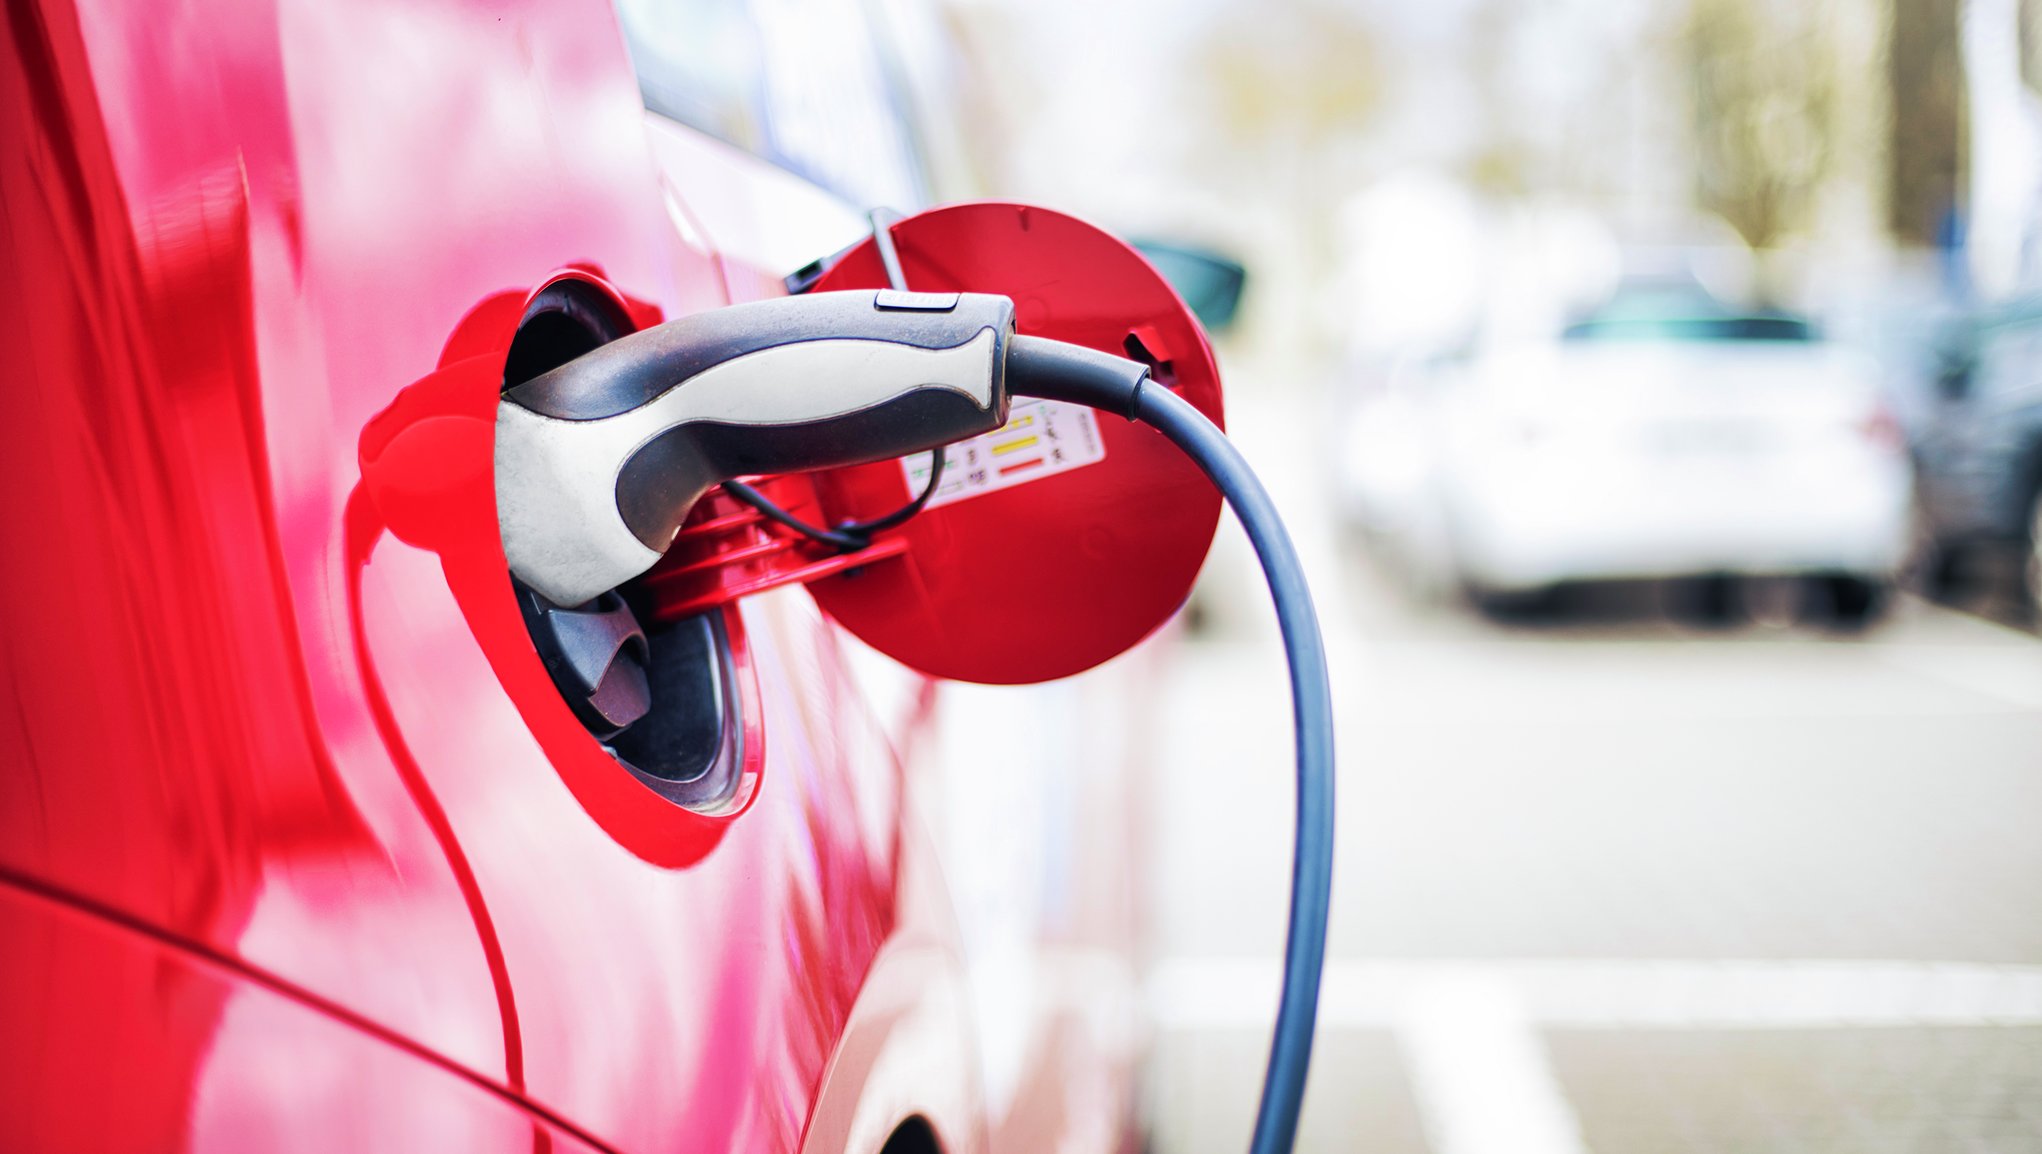 re-charching an electric vehicle